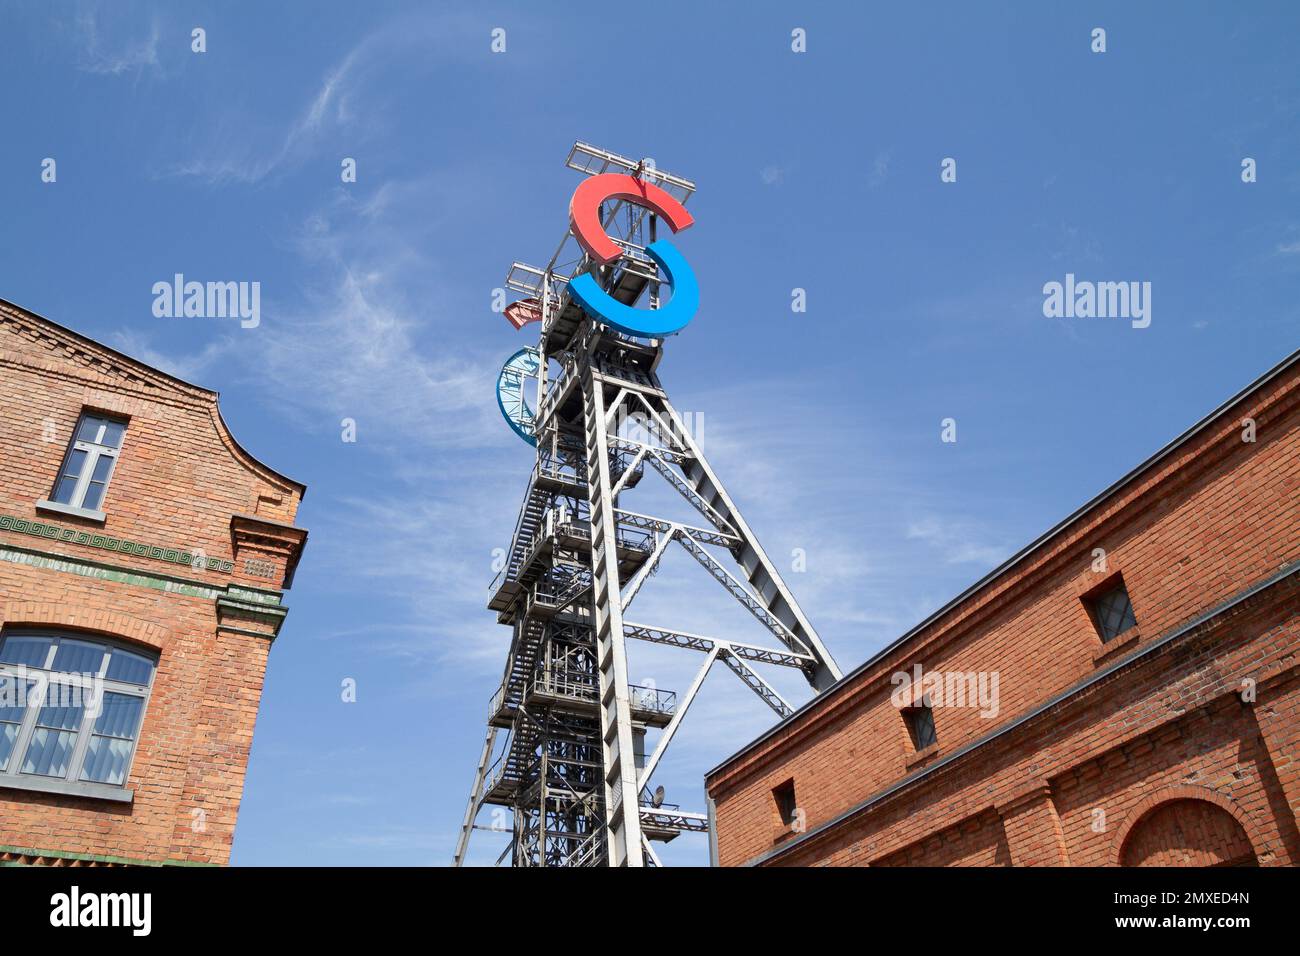 Silesia City Center shopping mall in Katowice, Poland. Located on site of former coal mine KWK Gottwald. SCC logo sign at antique tower shaft Jerzy. Stock Photo